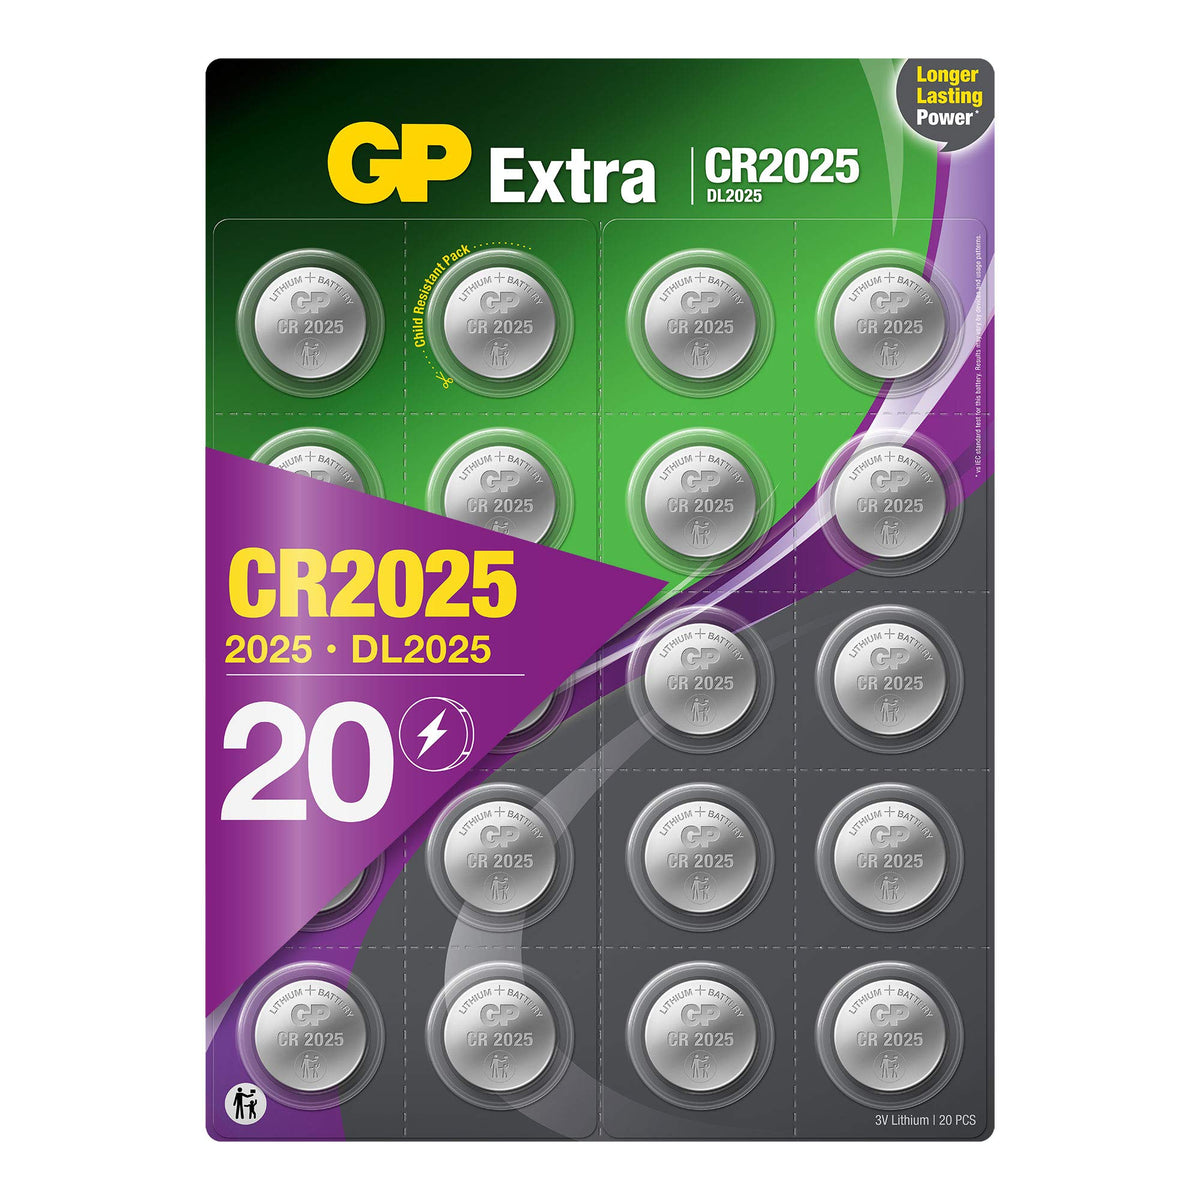 GP CR2025 3V Lithium Coin Cell Batteries 20 Pack - Flat Battery for Car Key/Key Fob Audi Mercedes Nissan - DL2025 2025 Batteries also suitable for scales/toys/heartrate monitor etc